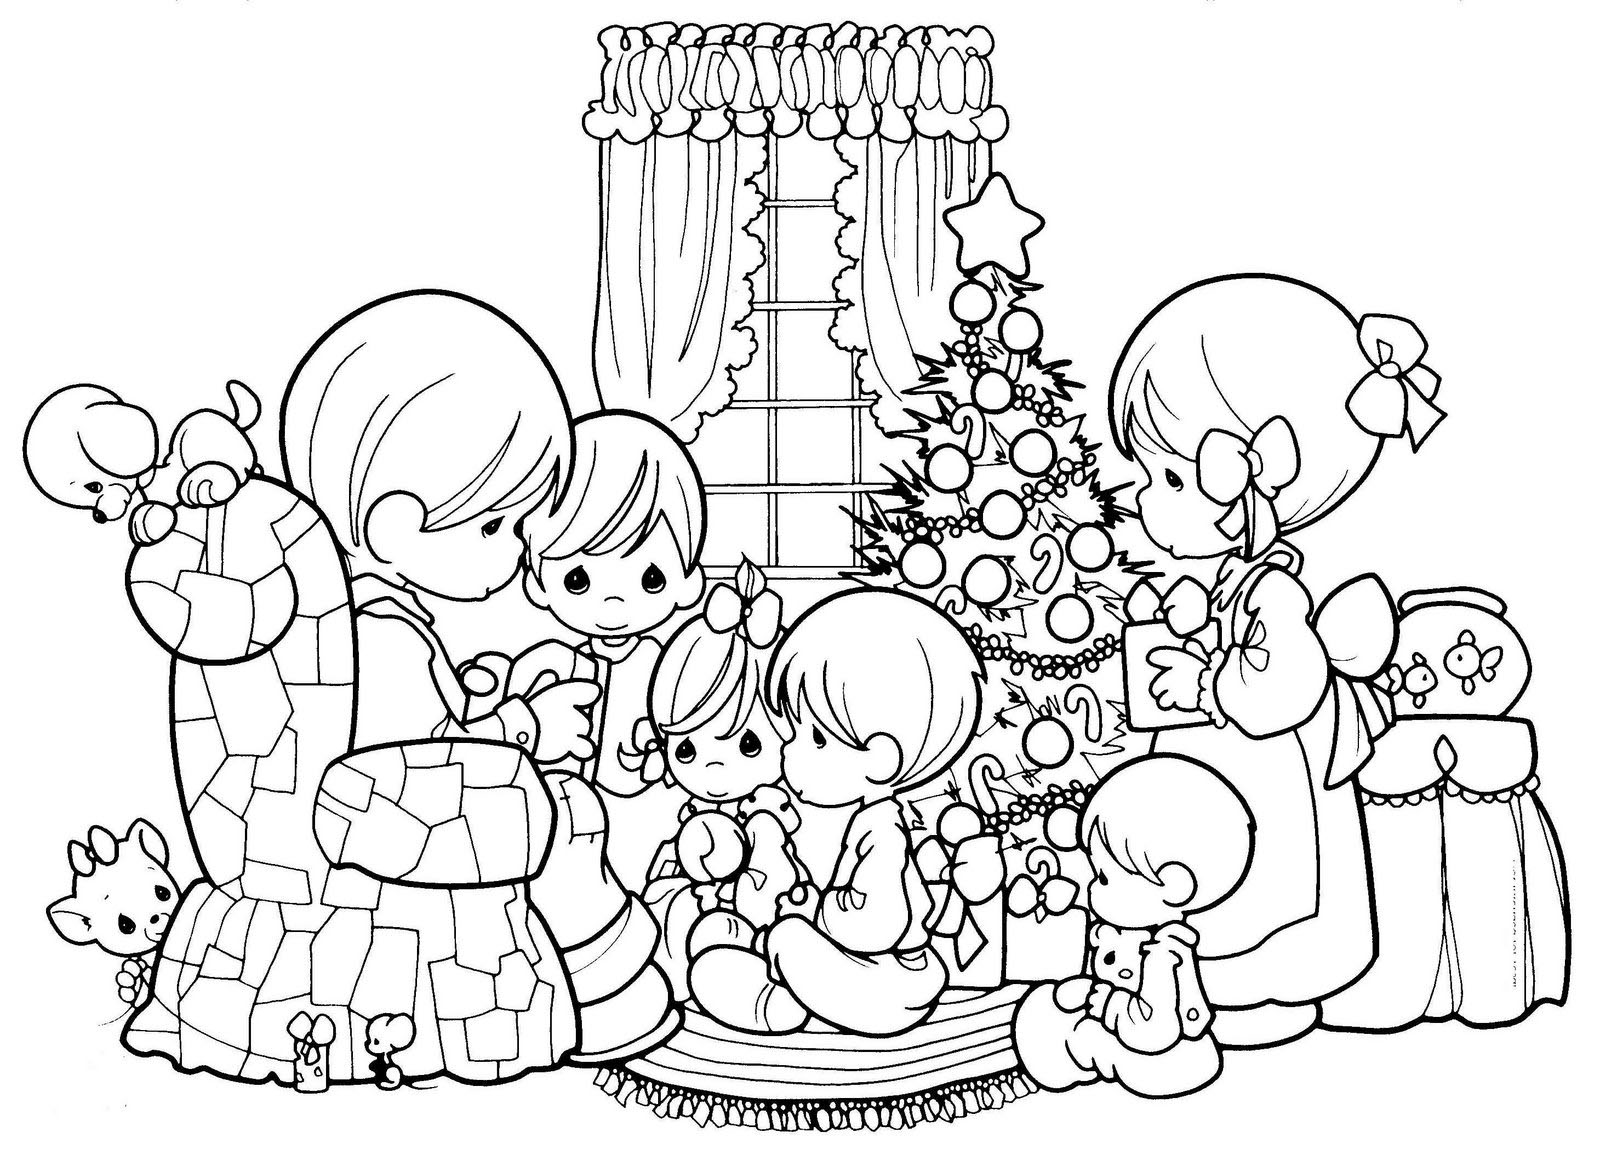 Pretty family drawn in the style of the 'Precious moments' characters. Precious Moments characters are generally sold to the general public in the form of statuettes, or affixed to cards and other media.